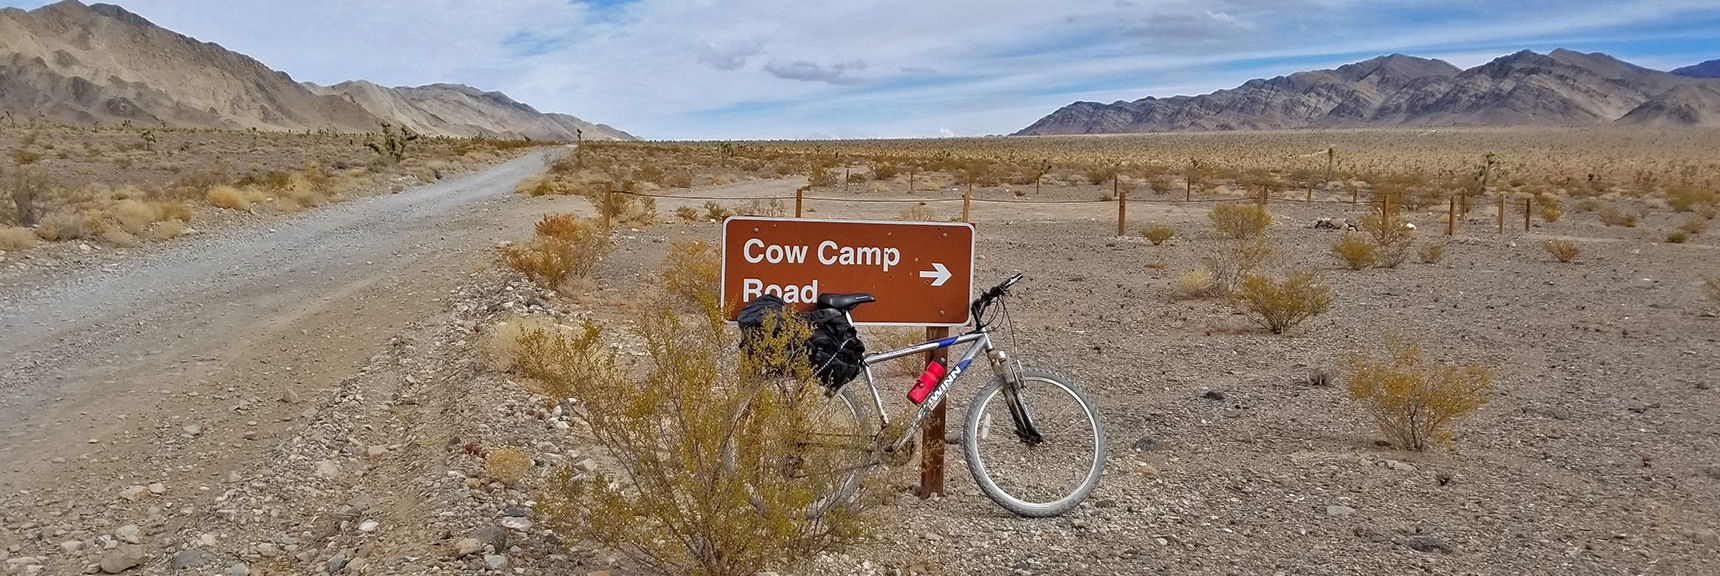 Intersection of Alamo Road and Cow Camp Road, Approach to Sheep Peak Routes | Lower Alamo Road | Sheep Range | Desert National Wildlife Refuge, Nevada